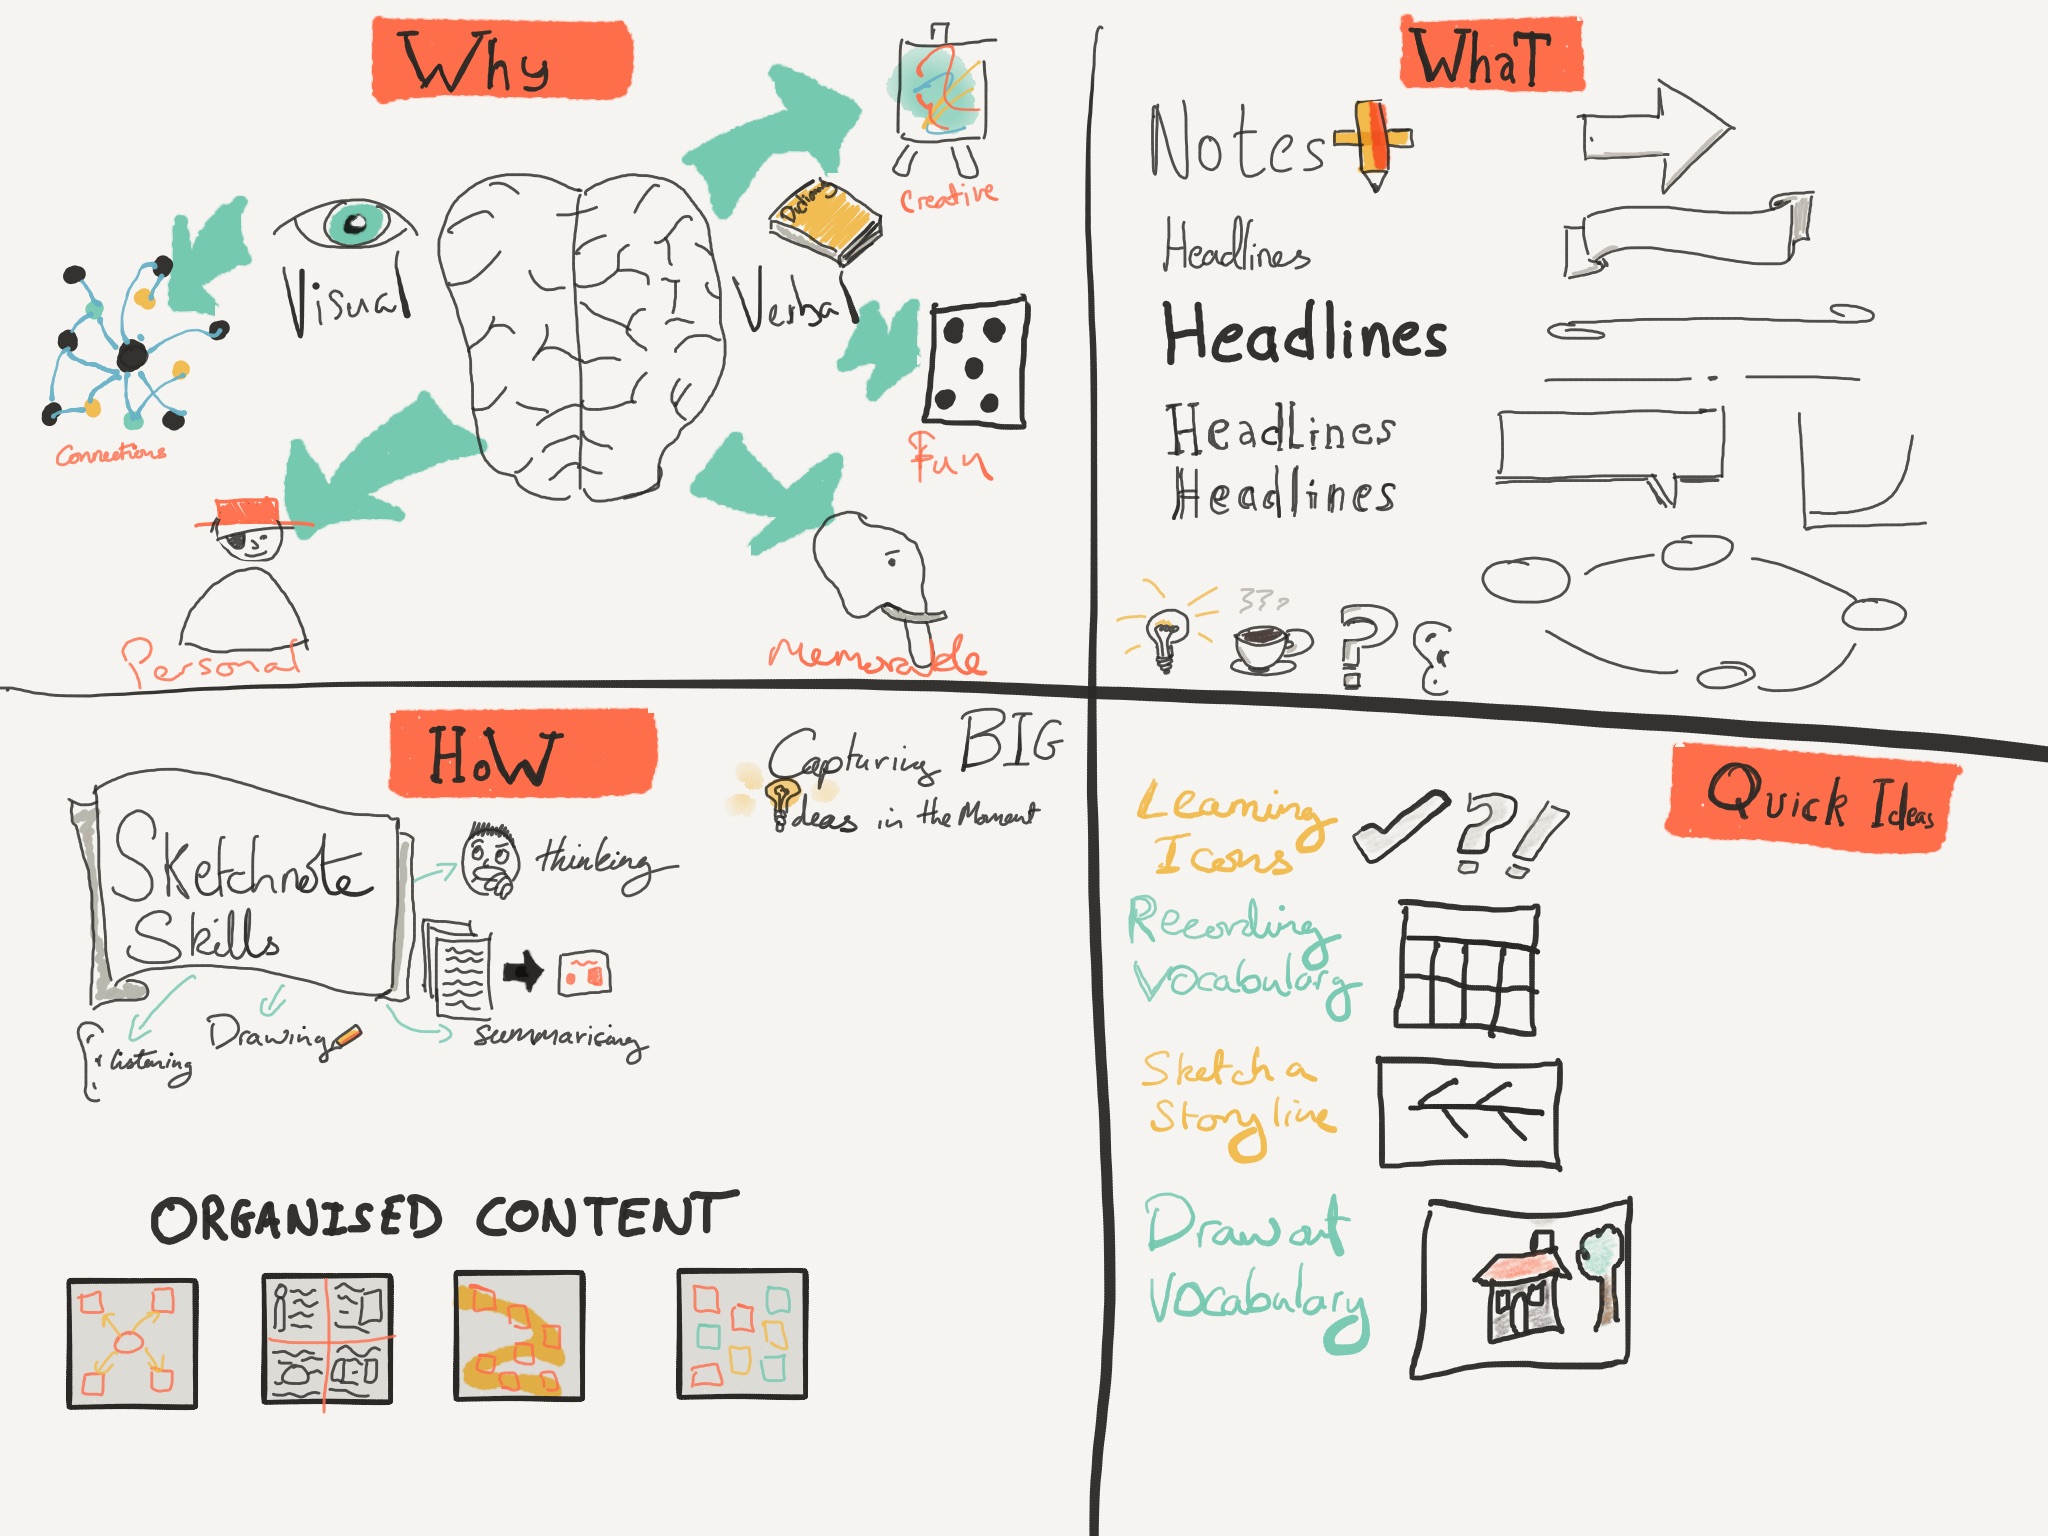 What Are Sketchnotes? (and Why Should You Use Them)